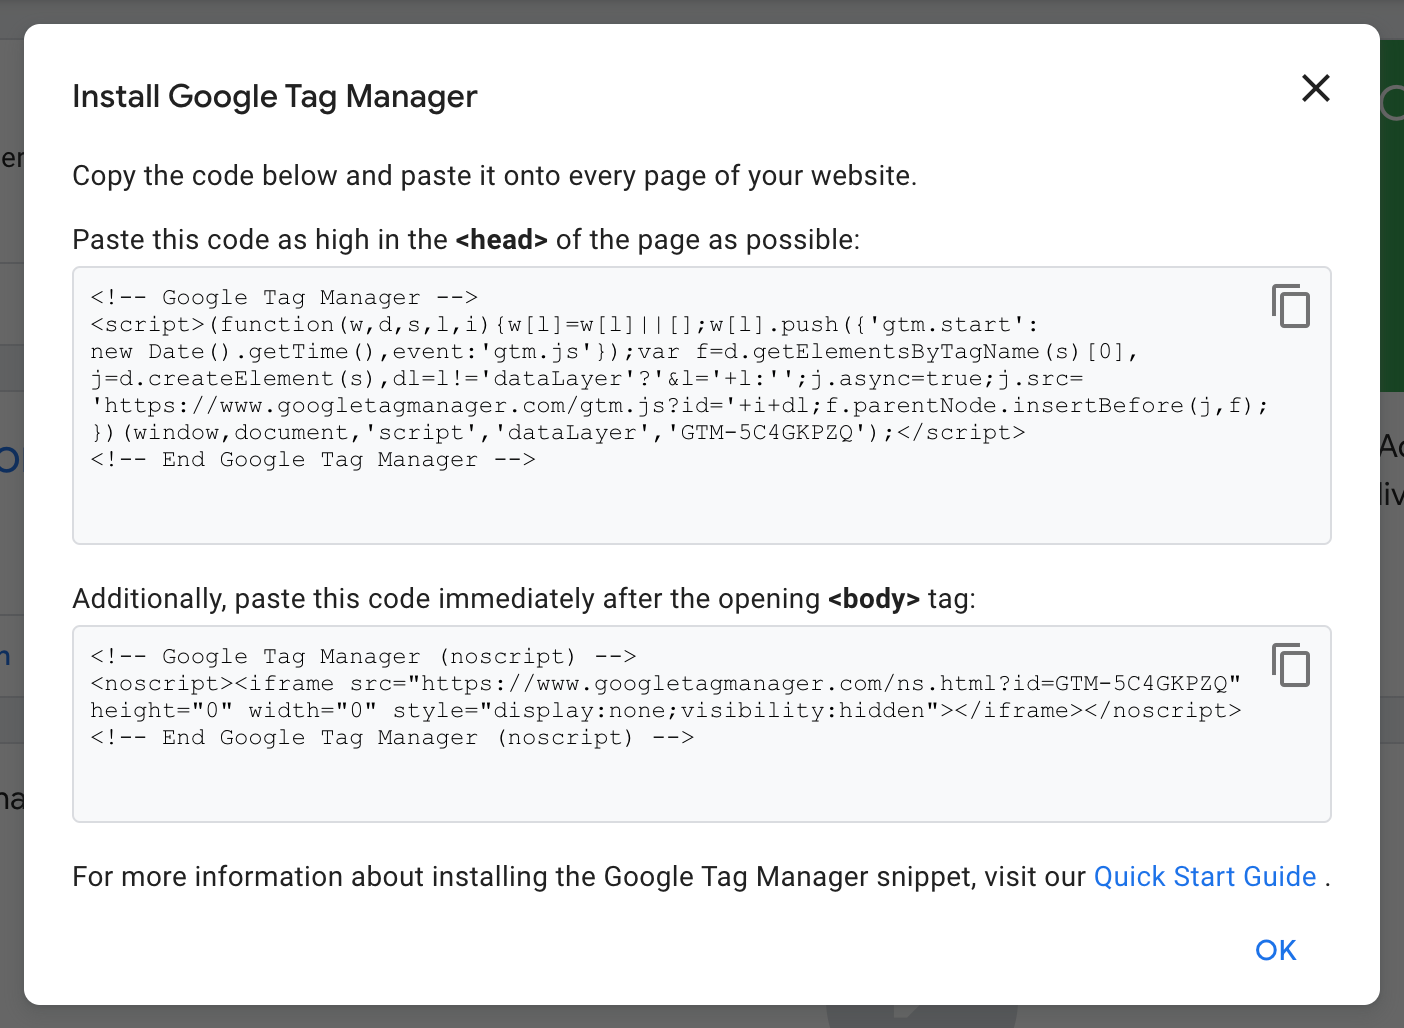 Google Tag Manager code